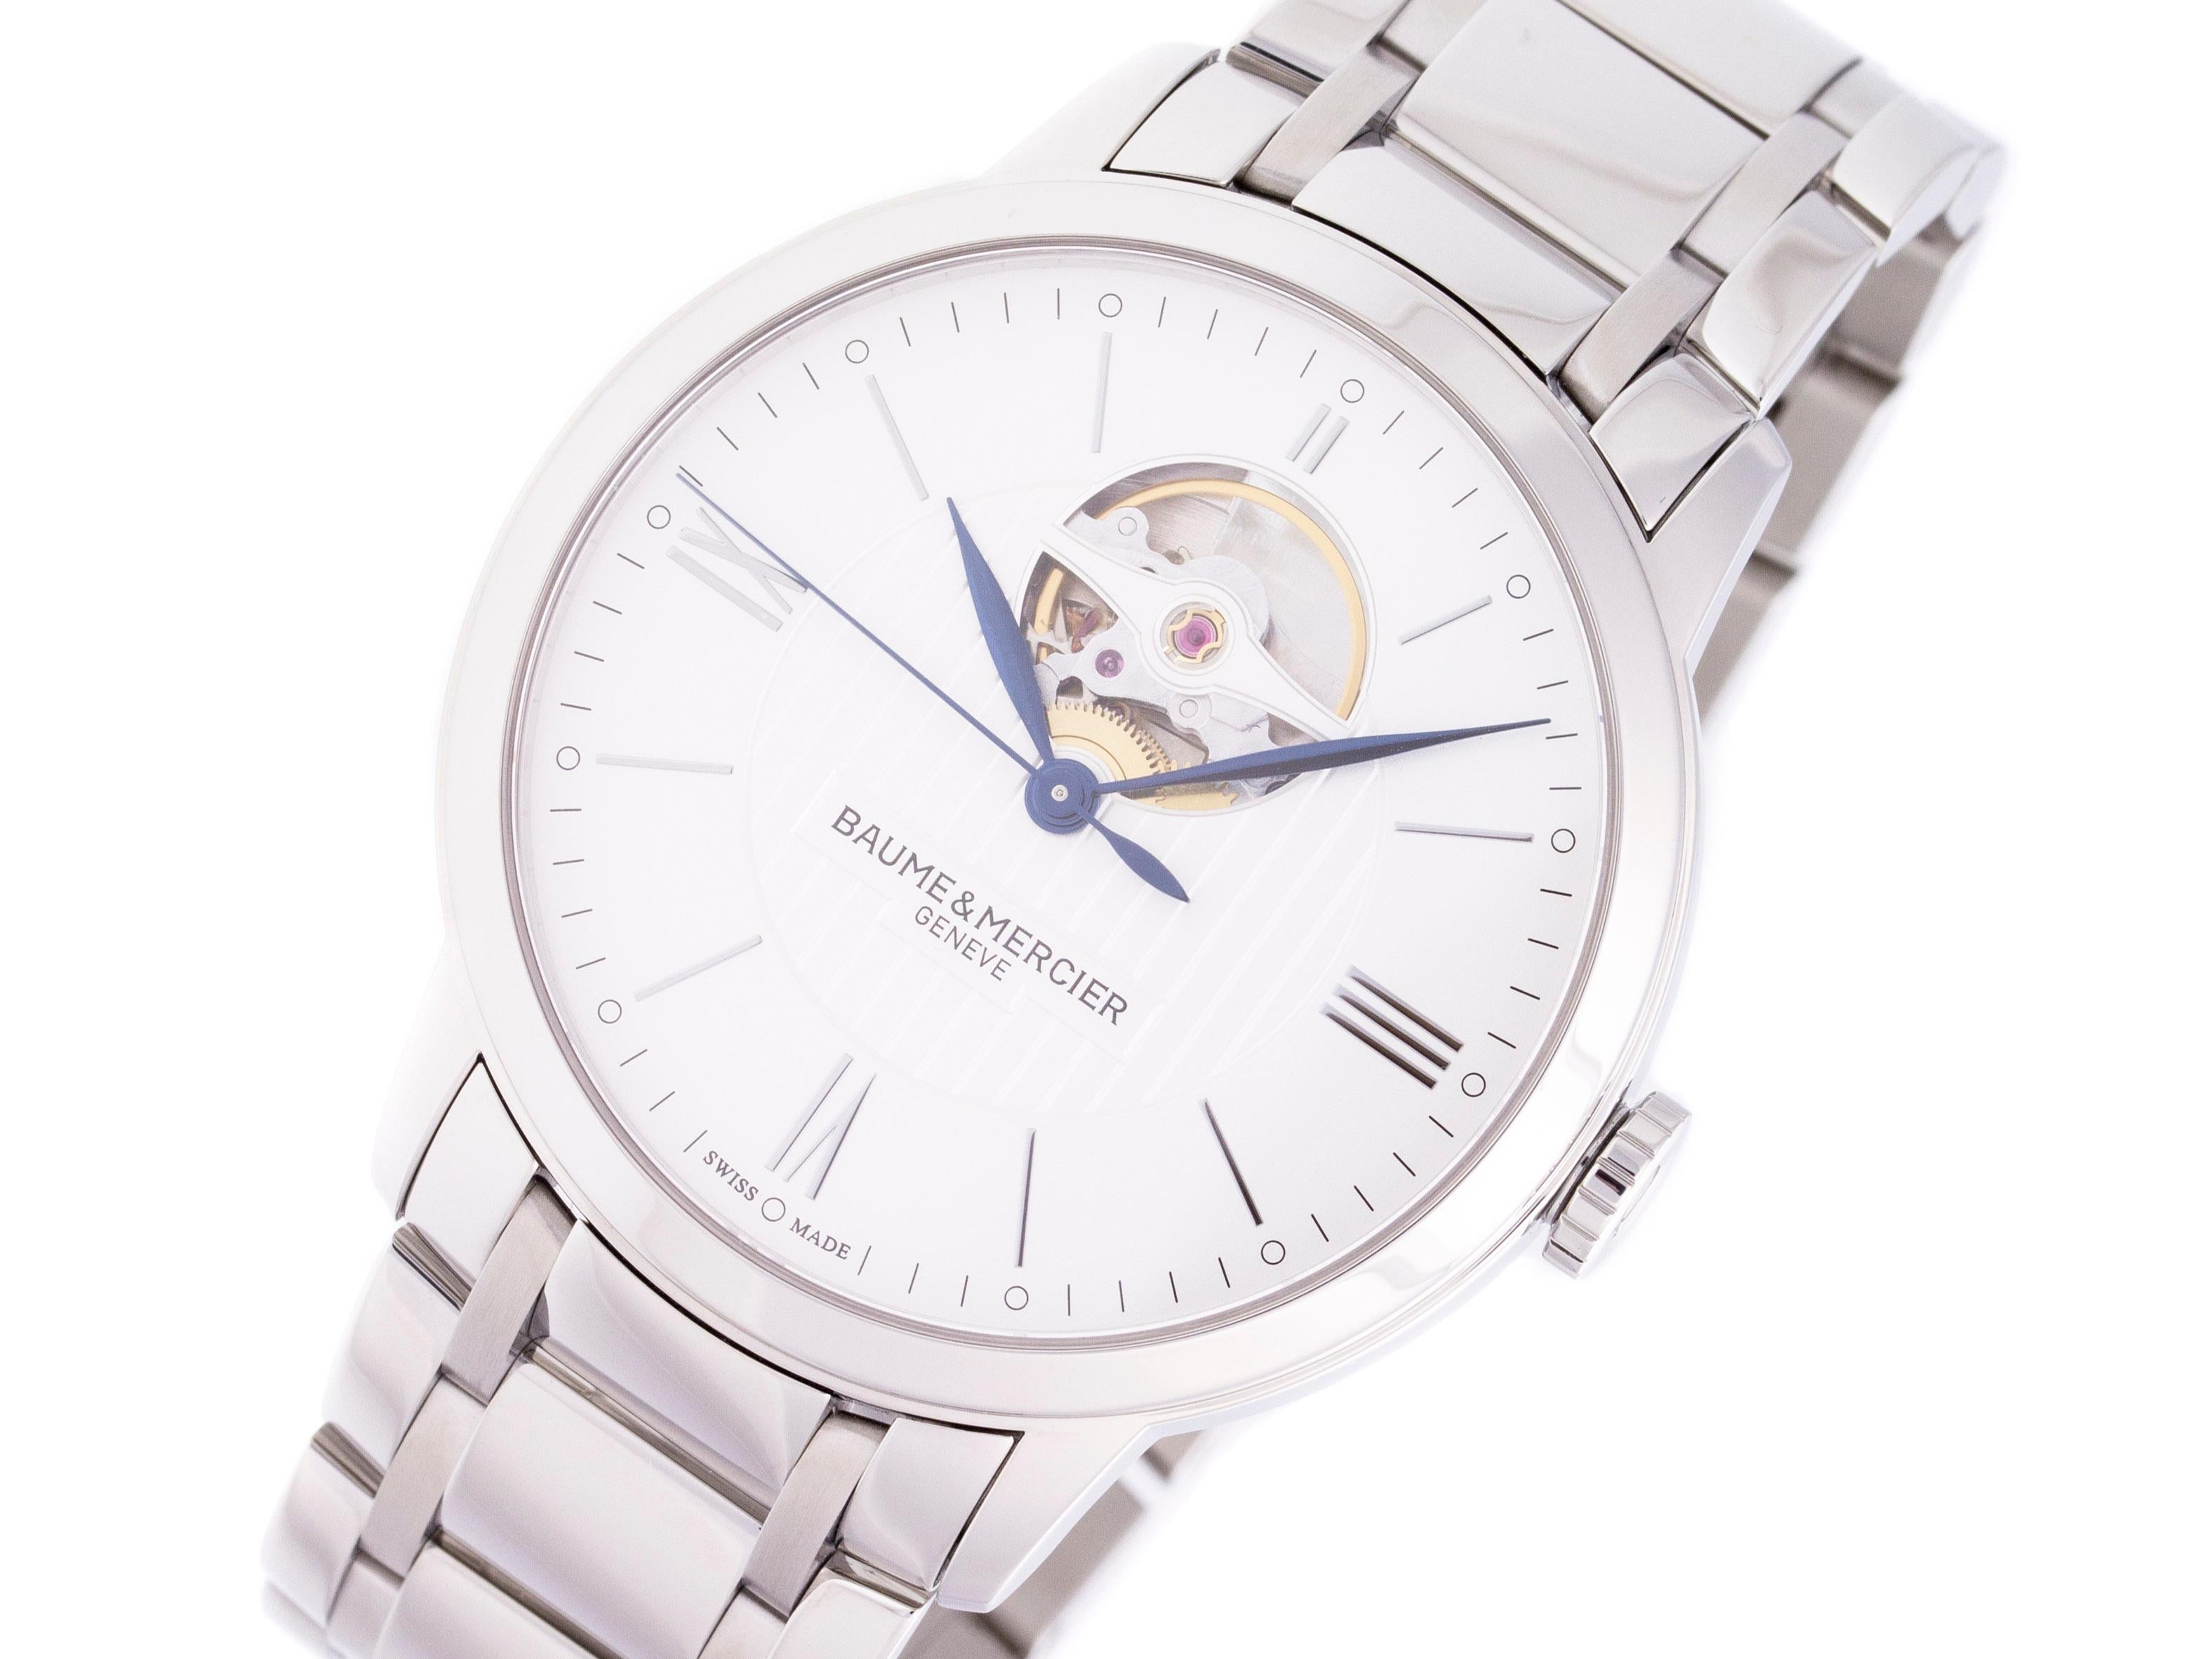 Brand	Baume & Mercier
Series	Classima
Model	MOA10275
Gender	Men's
Condition	Great Condition Store Display Watch
Material	Stainless Steel
Finish	Polished
Caseback	Exhibition
Diameter	40mm
Thickness	
Bezel	Fixed Stainless Steel
Crystal	Scratch